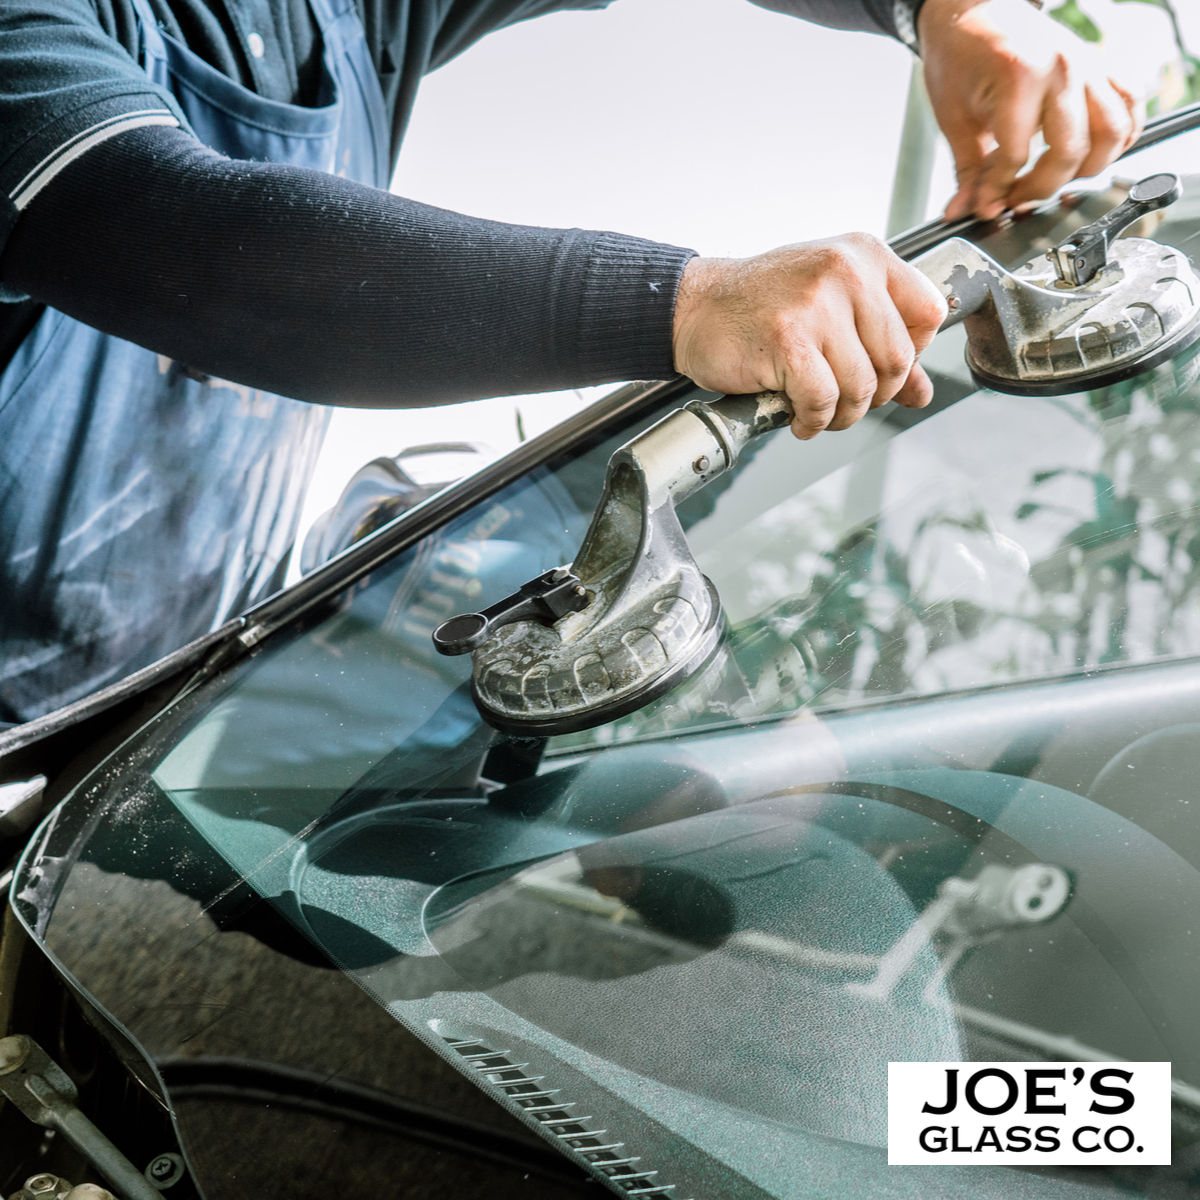 Replace Your Large 1 Piece Windshield with Help from Joe’s Glass Co!